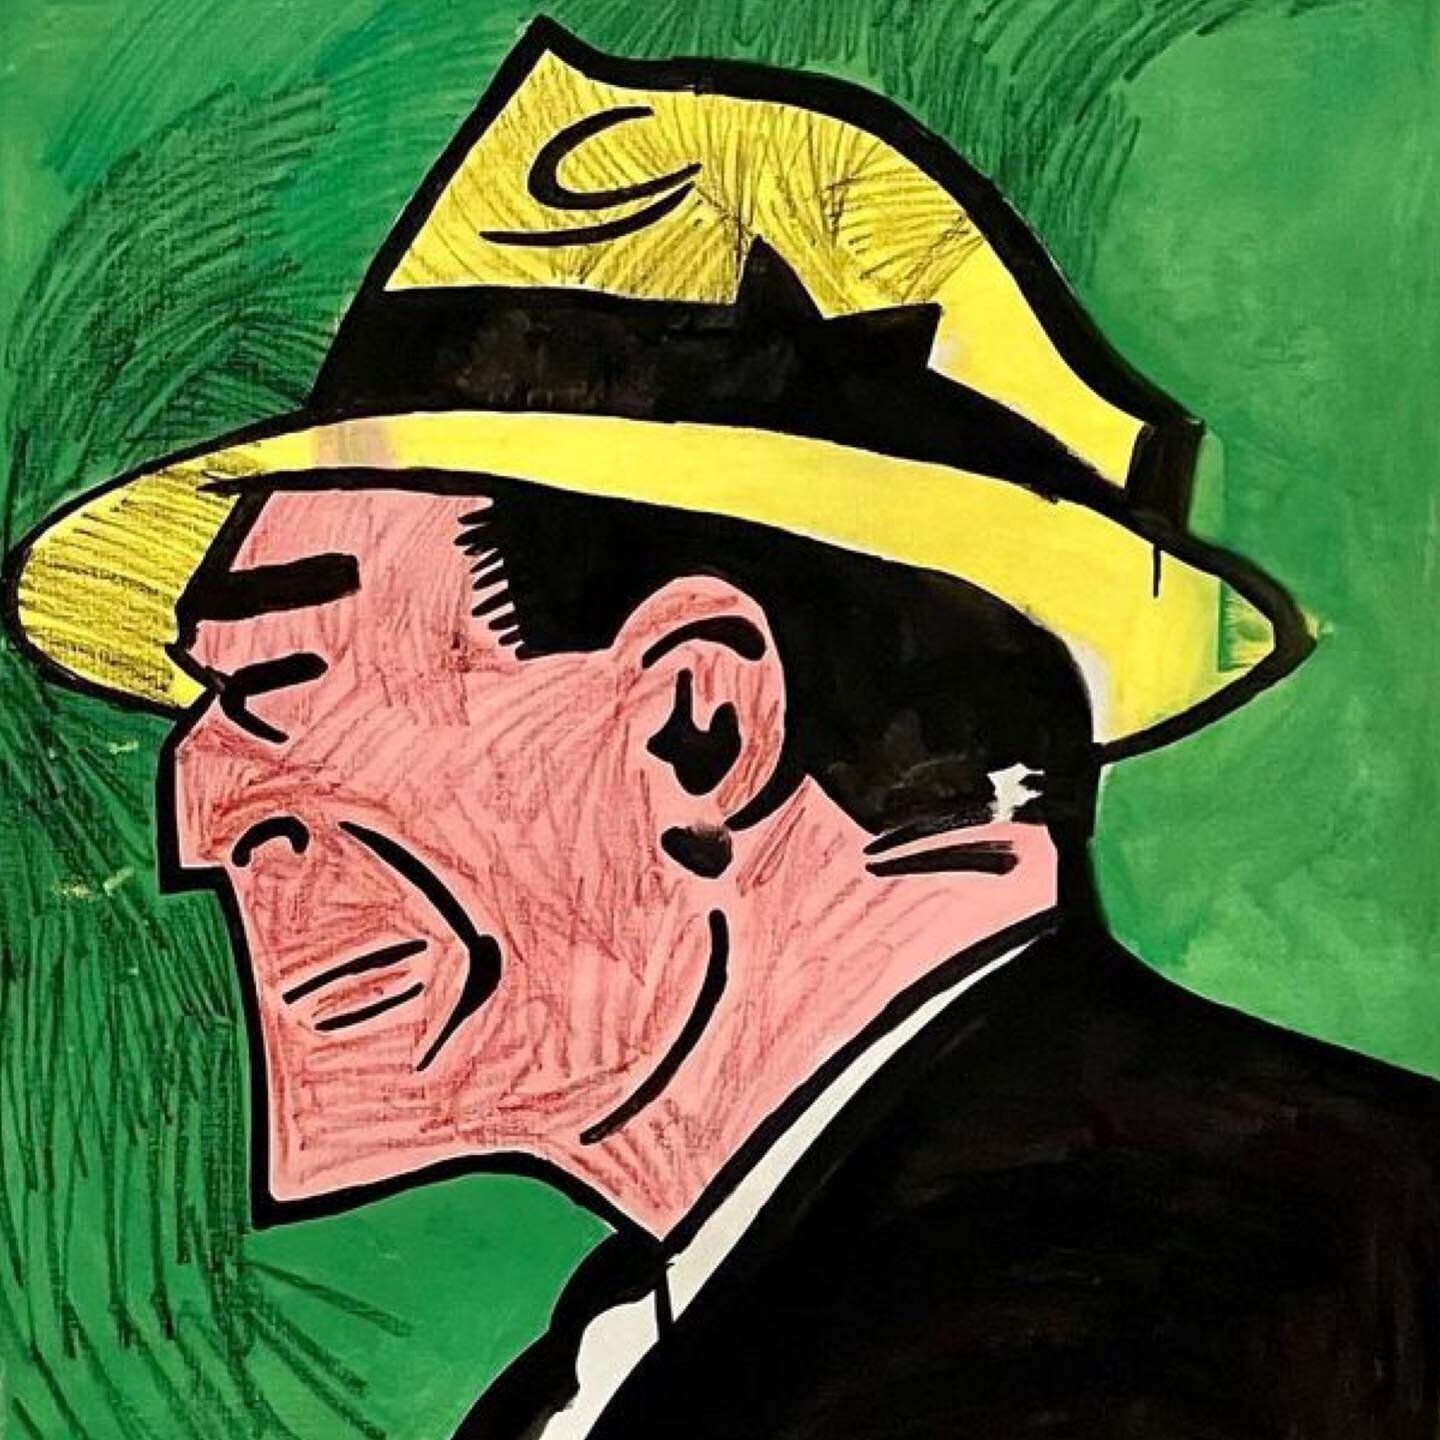 Dick Tracy

&ldquo;Thirty Are Better Than One&rdquo; at the Brant Foundation, New York City. 

@thebrantfoundation @warholfoundation #art #andywarhol #peterbrant #exhibition #openingnight #brantfoundation #nyc